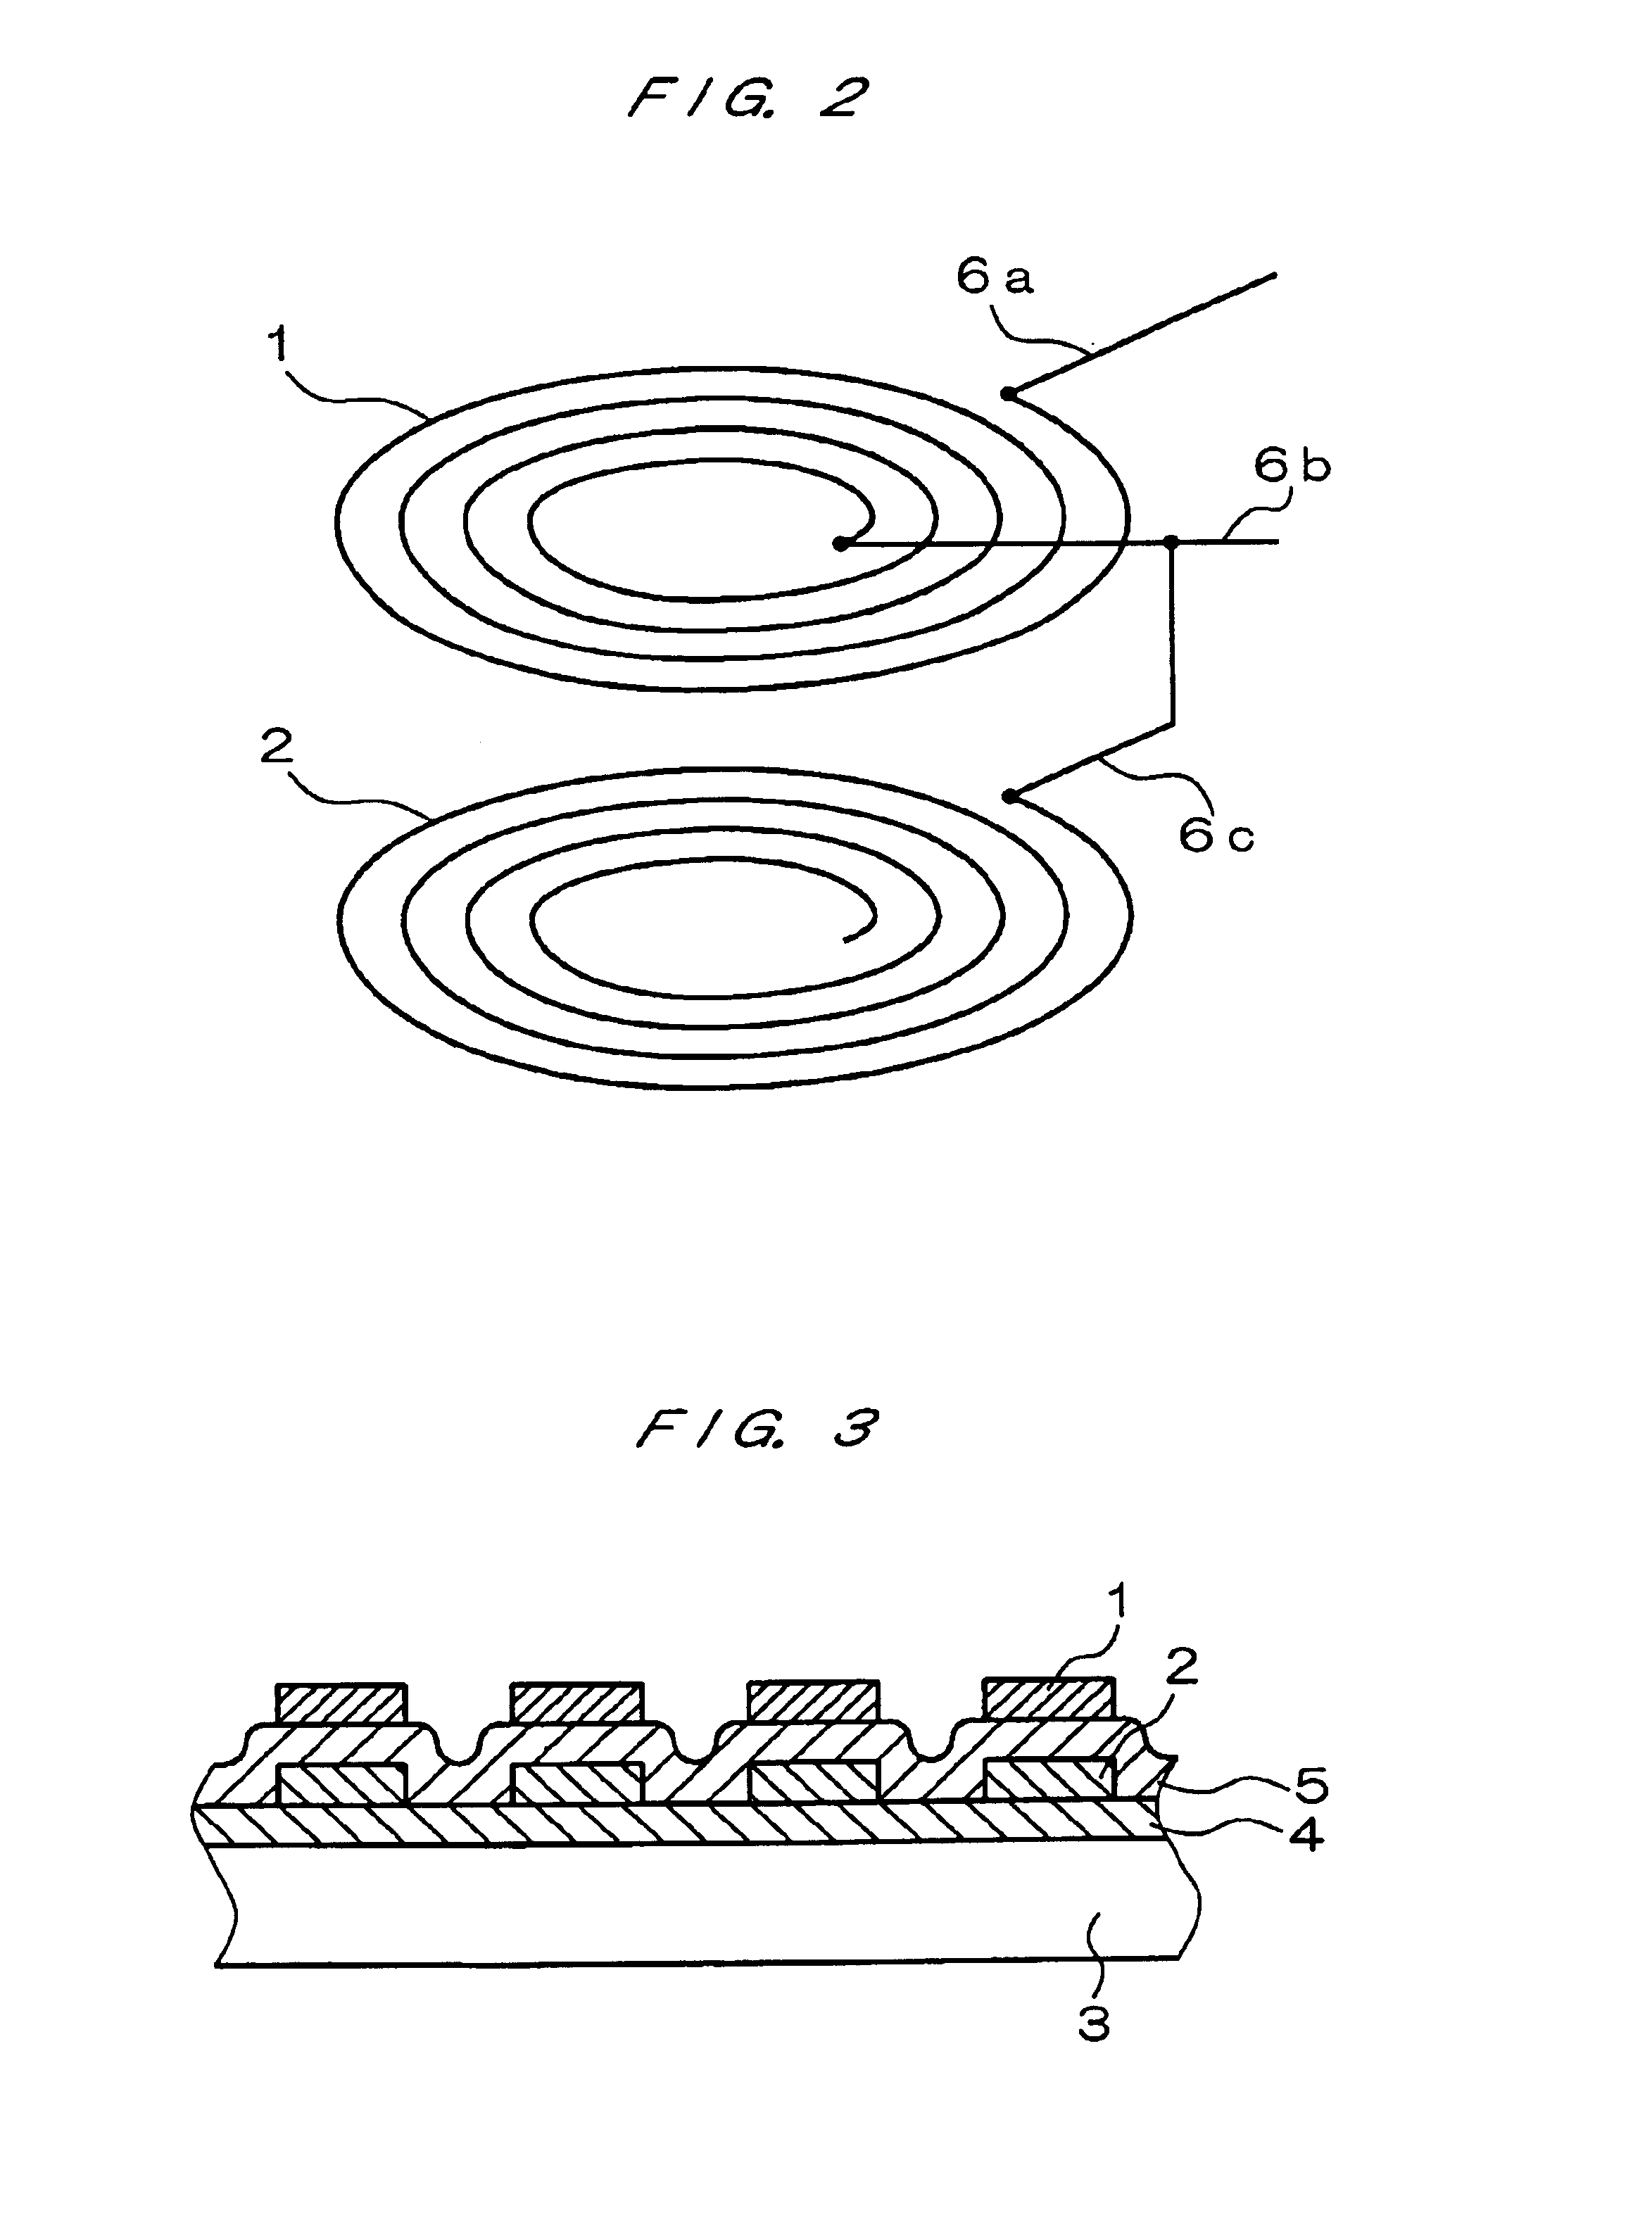 Inductor element